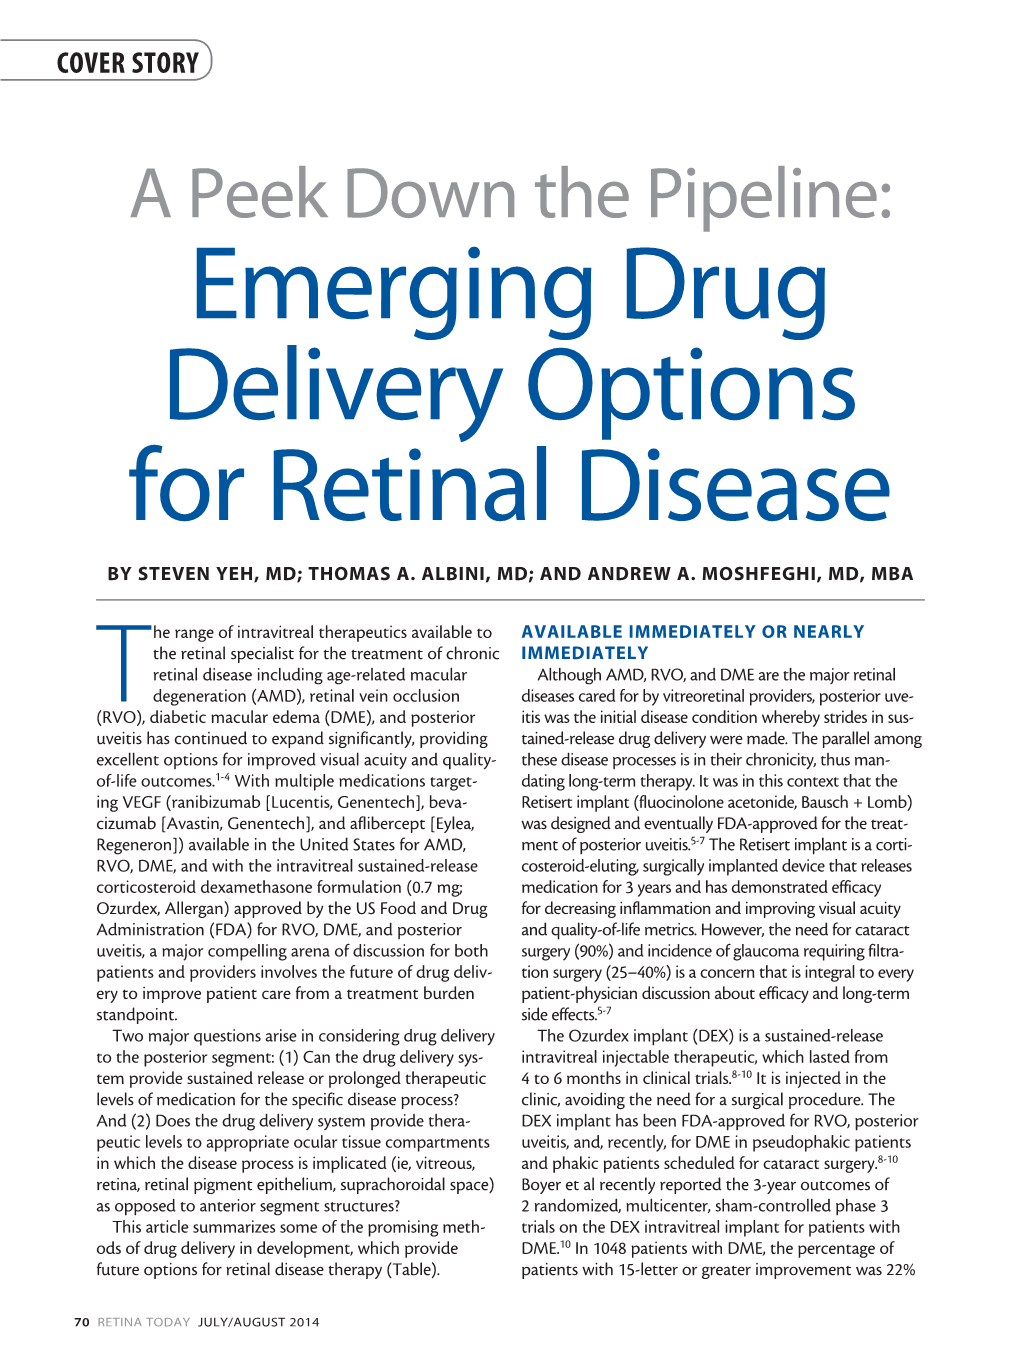 Emerging Drug Delivery Options for Retinal Disease by STEVEN YEH, MD; THOMAS A